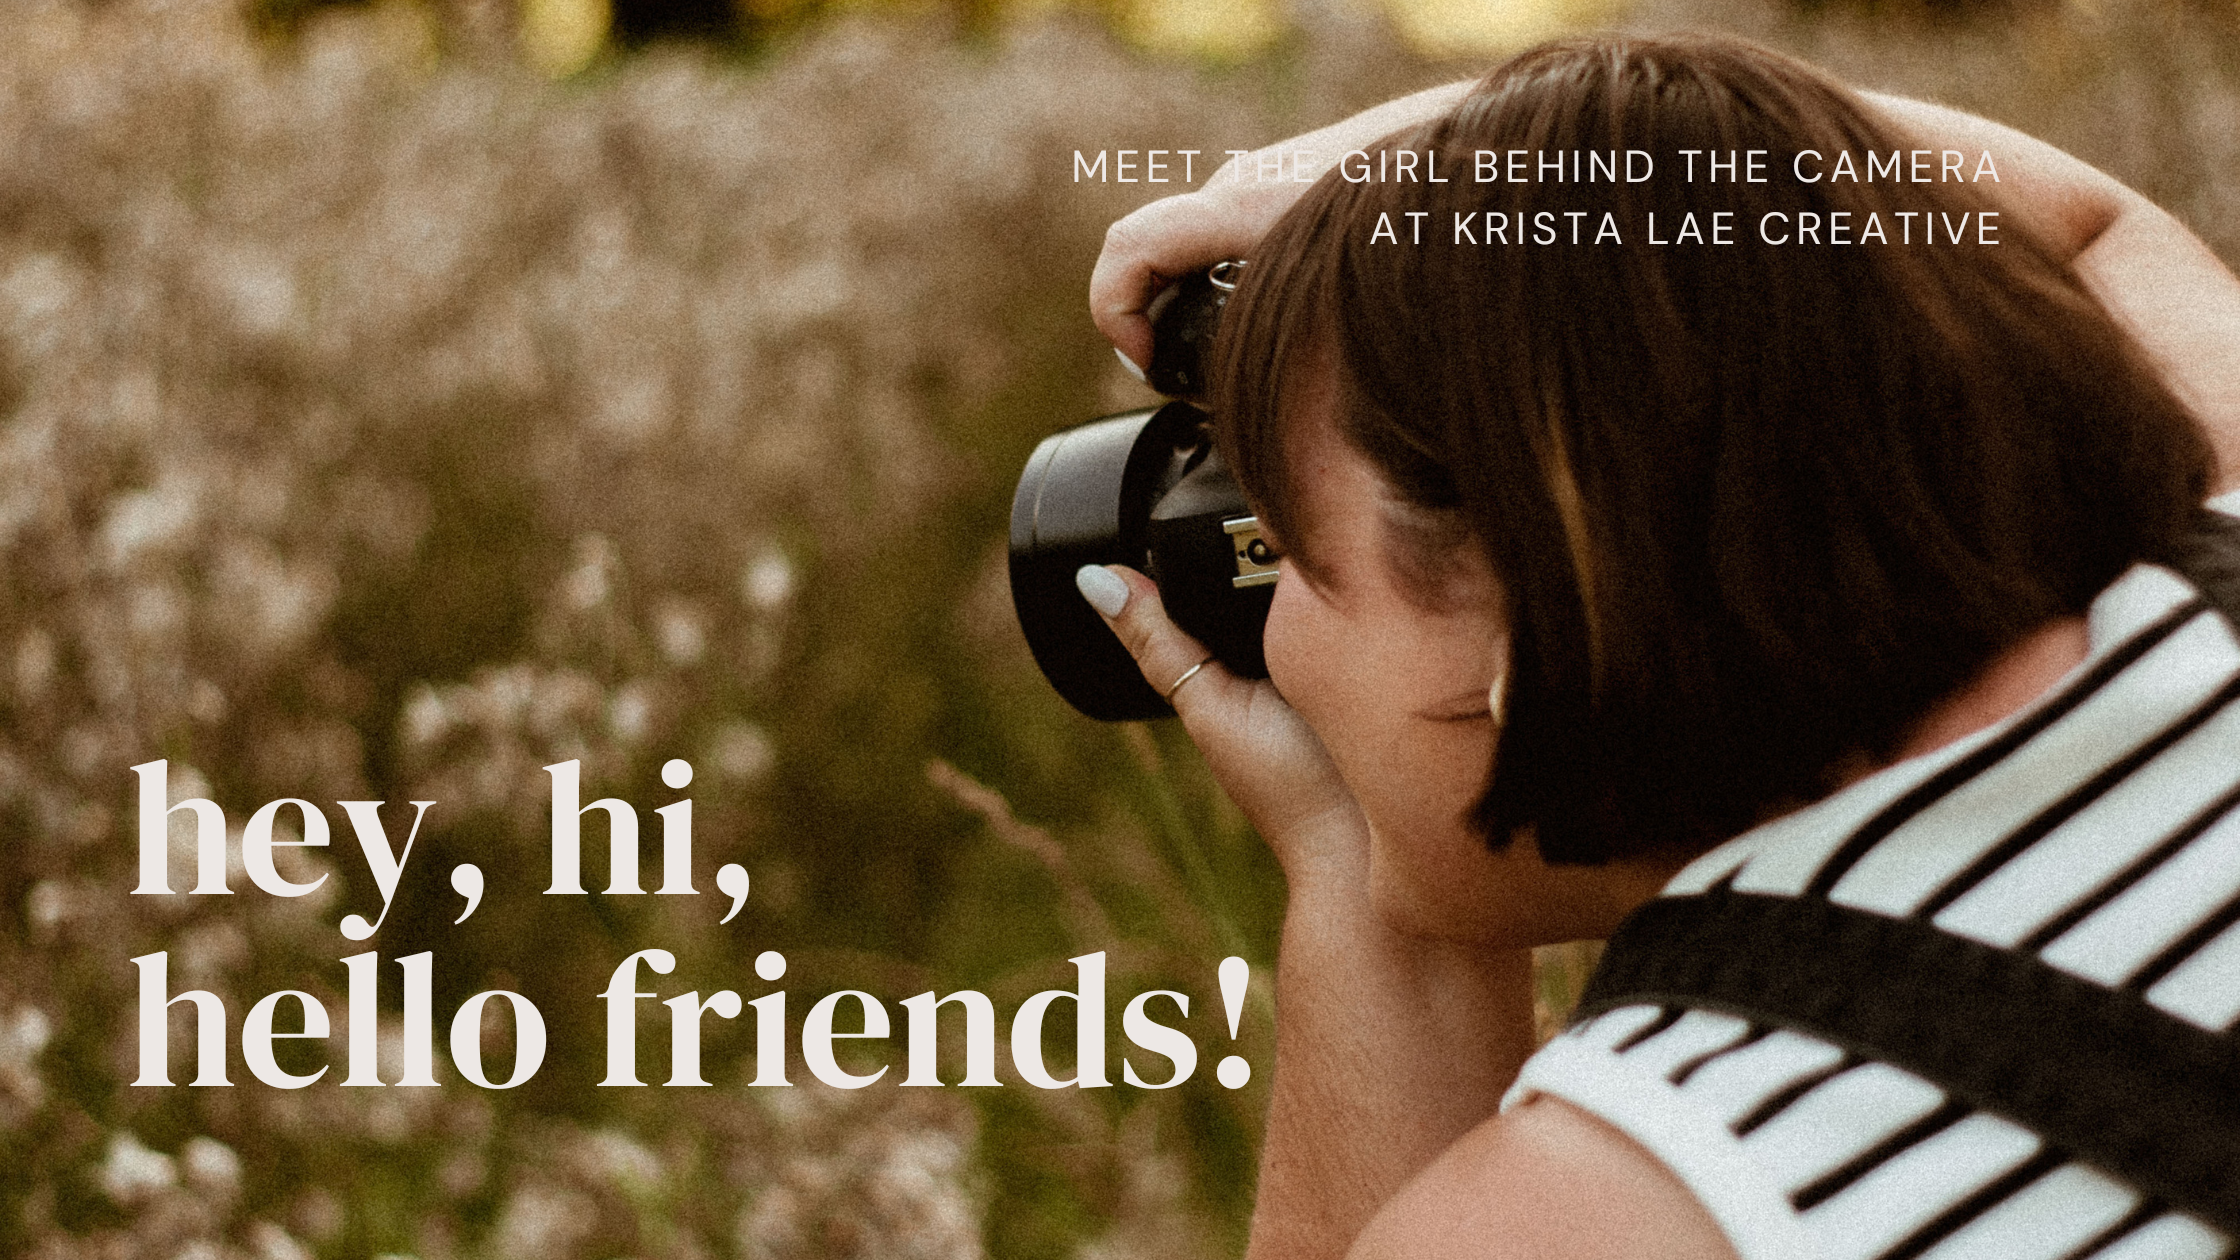 Girl taking photo with camera. Text on photo says "hey, hi, hello friends! Meet the girl behind the camera at Krista Lae Creative"